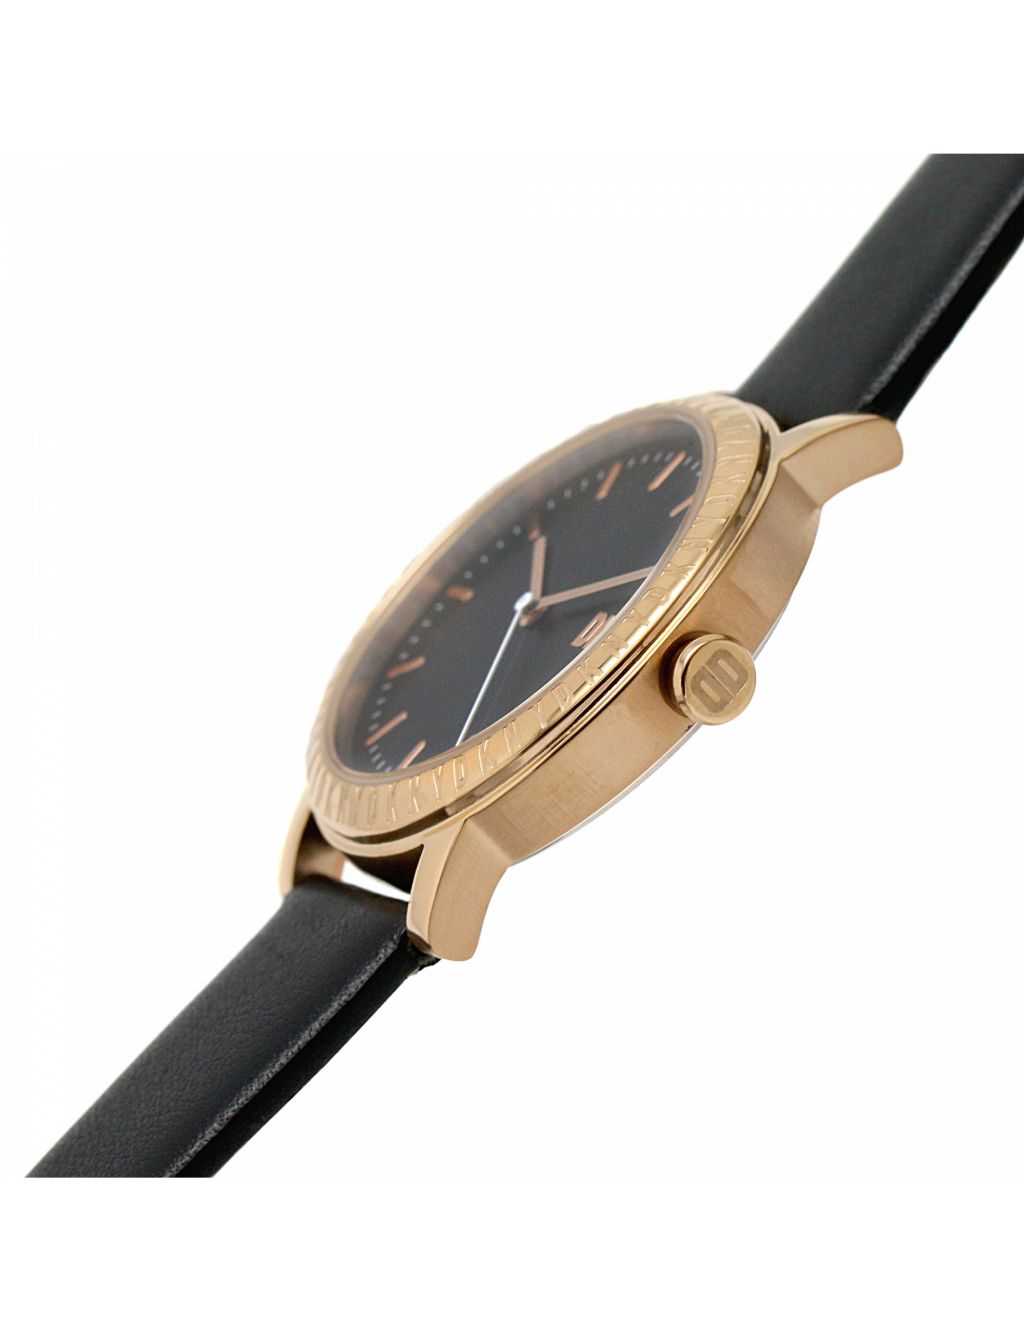 DKNY 7th Avenue Black Leather Watch image 5